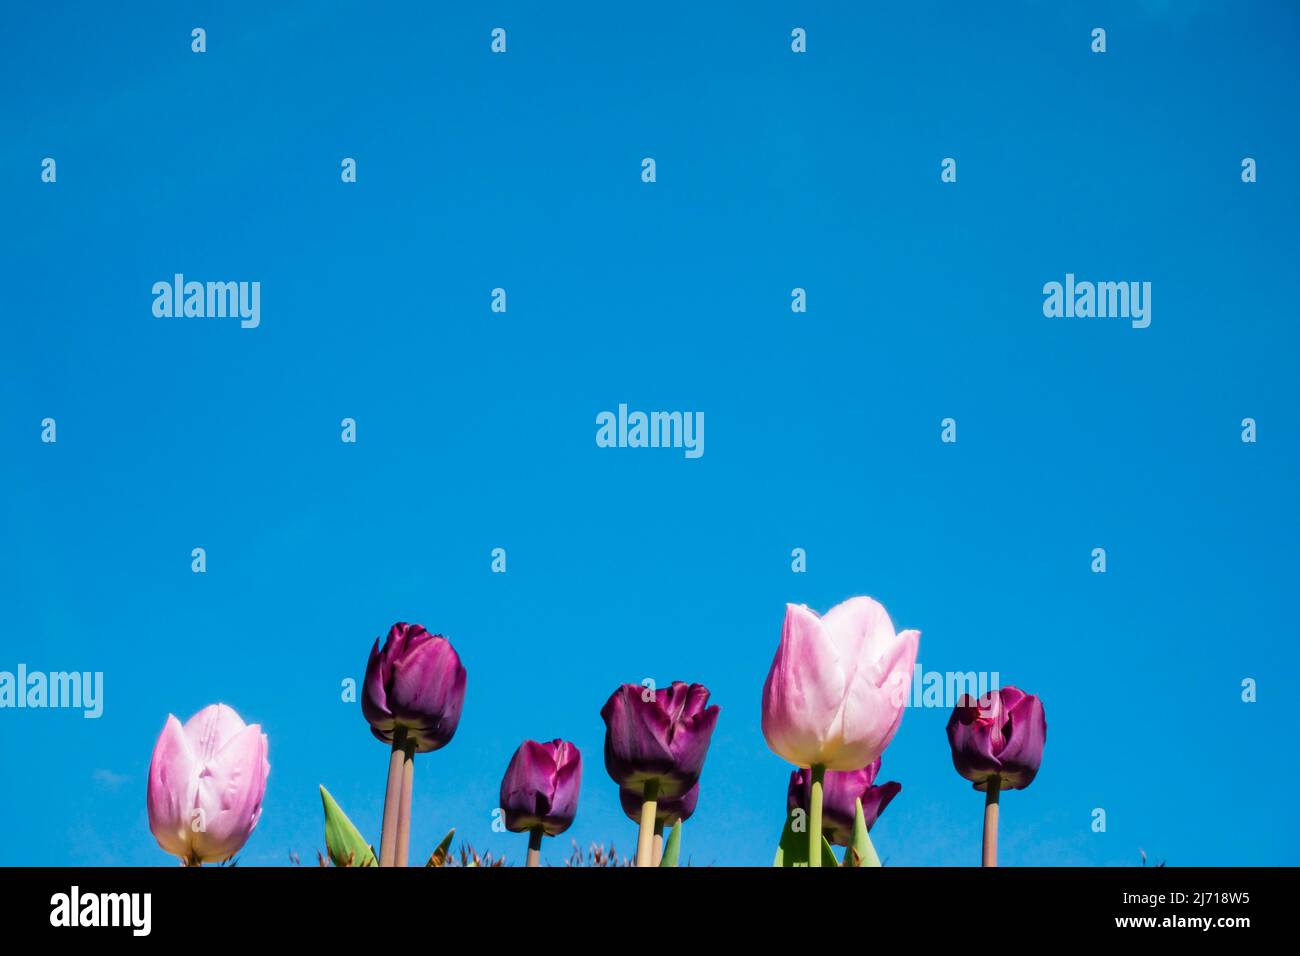 Pink and purple tulip flowers against a blue sky looking up with copyspace. Stock Photo